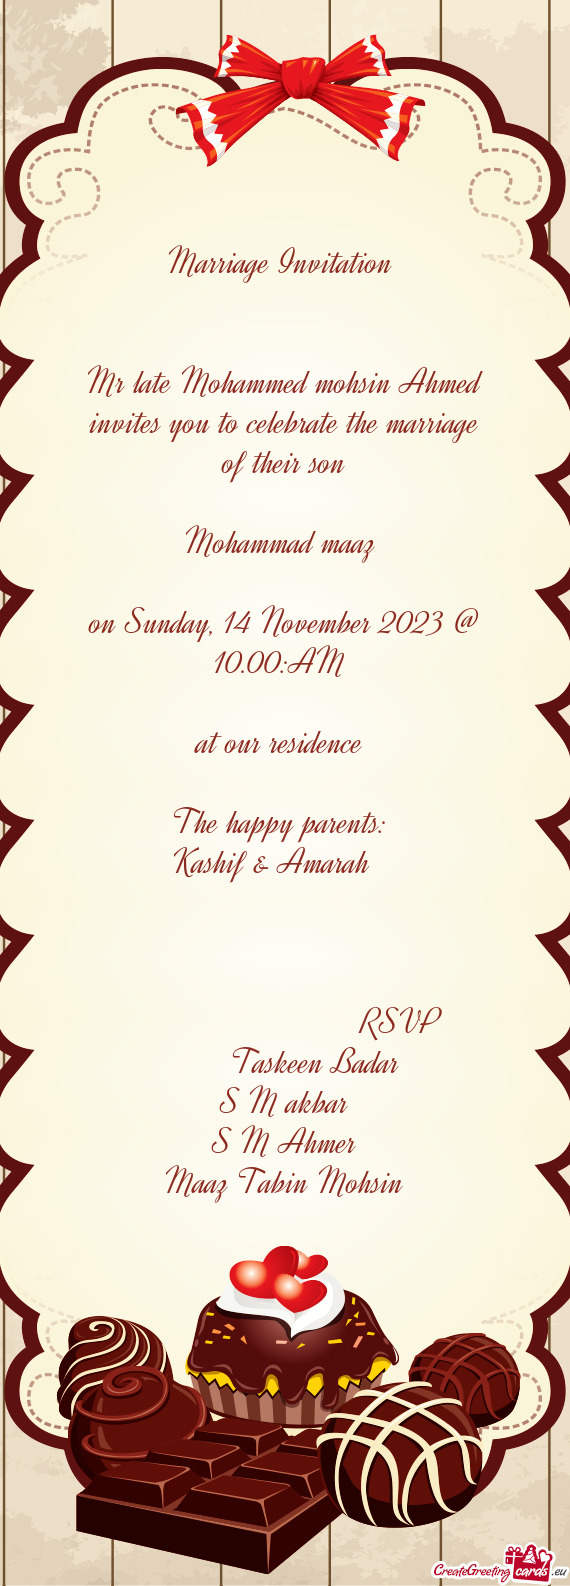 Mr late Mohammed mohsin Ahmed invites you to celebrate the marriage of their son